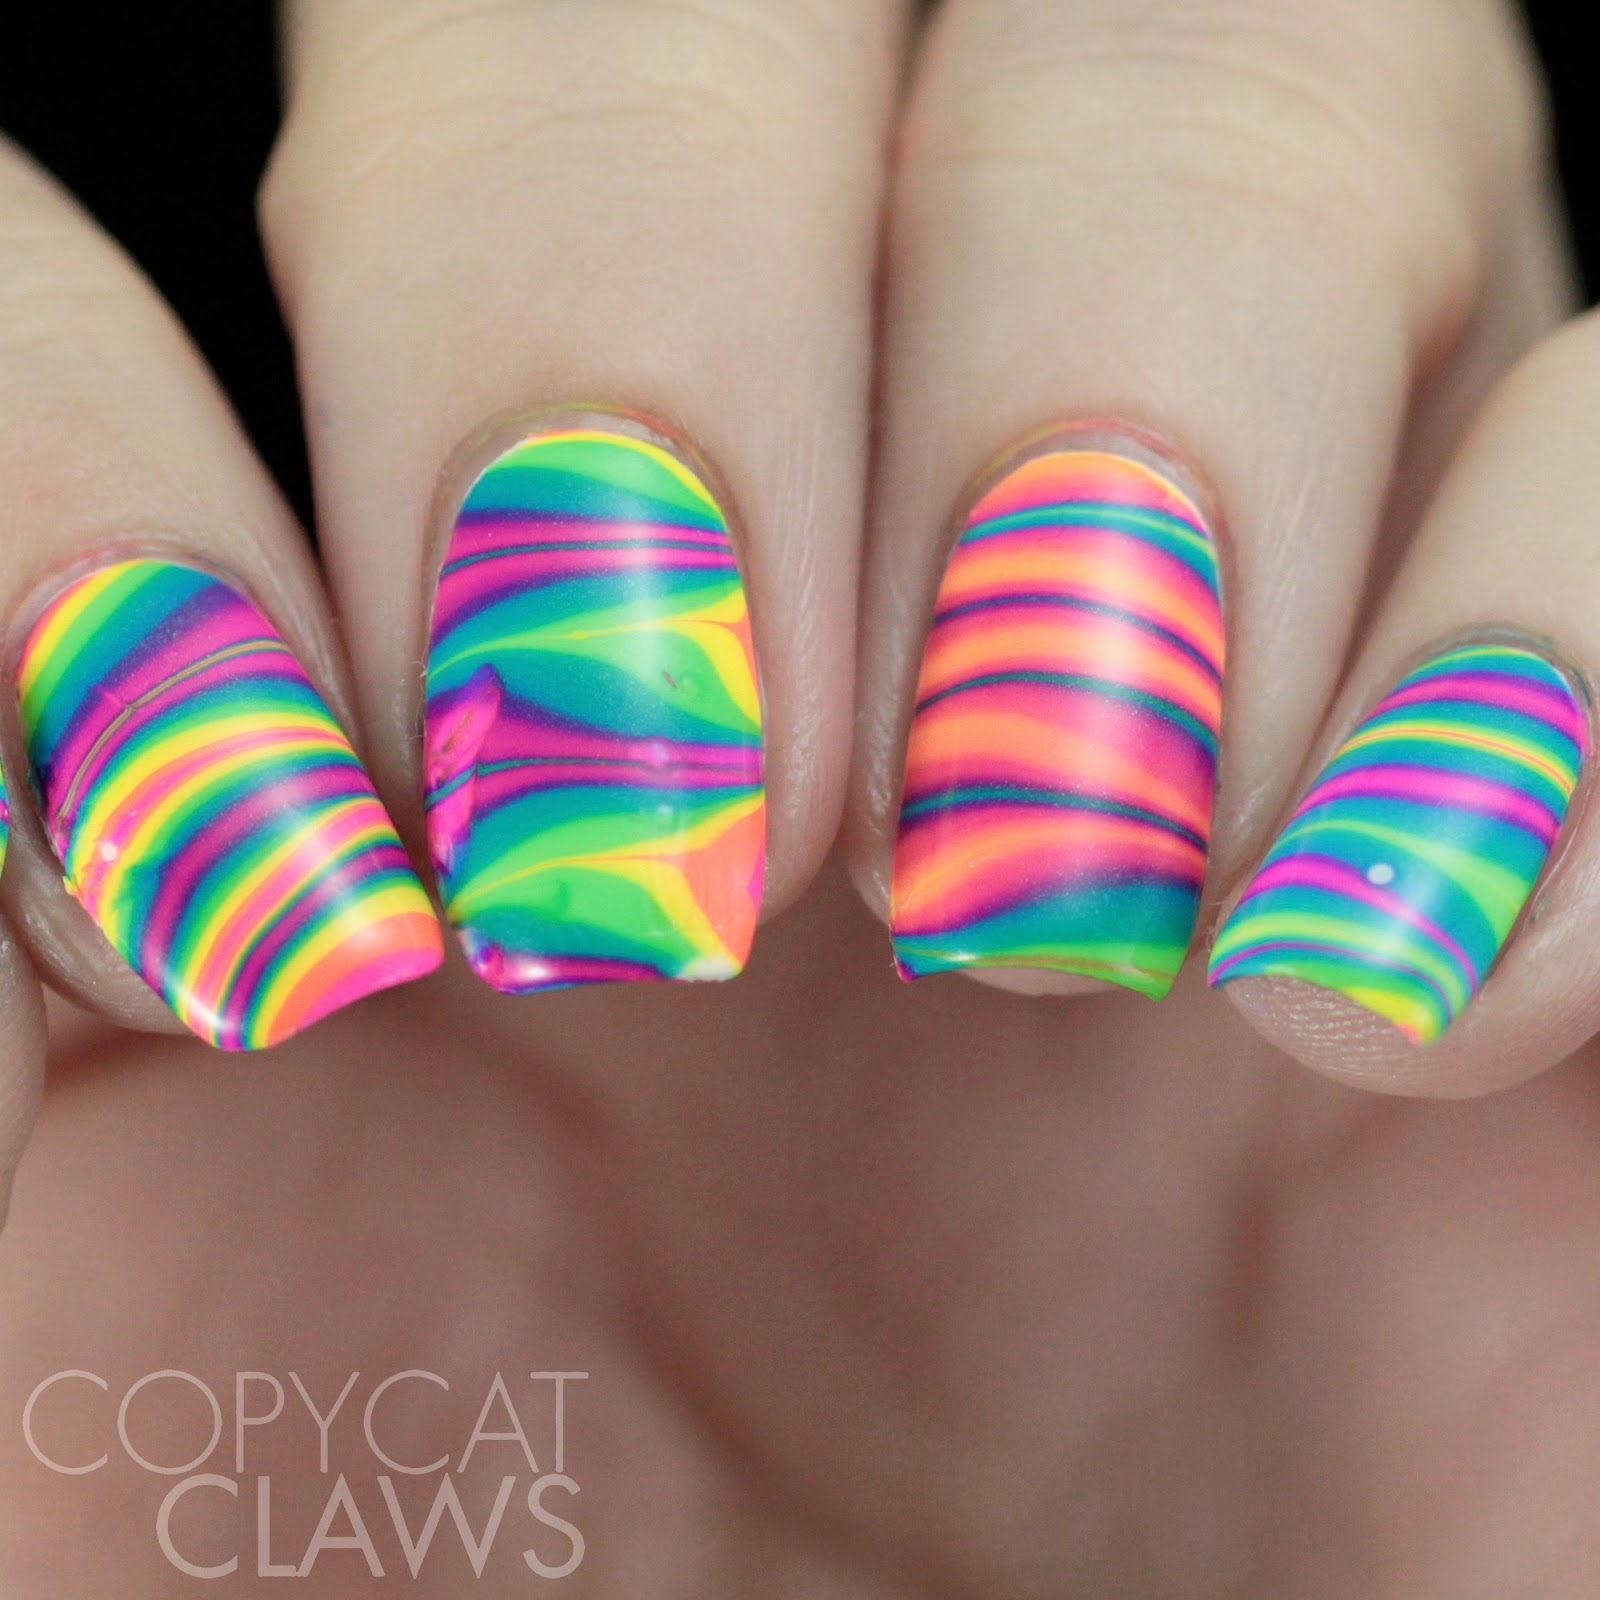 Copycat Claws: The Digit-al Dozen does Marble - Water Marble Nails With ...